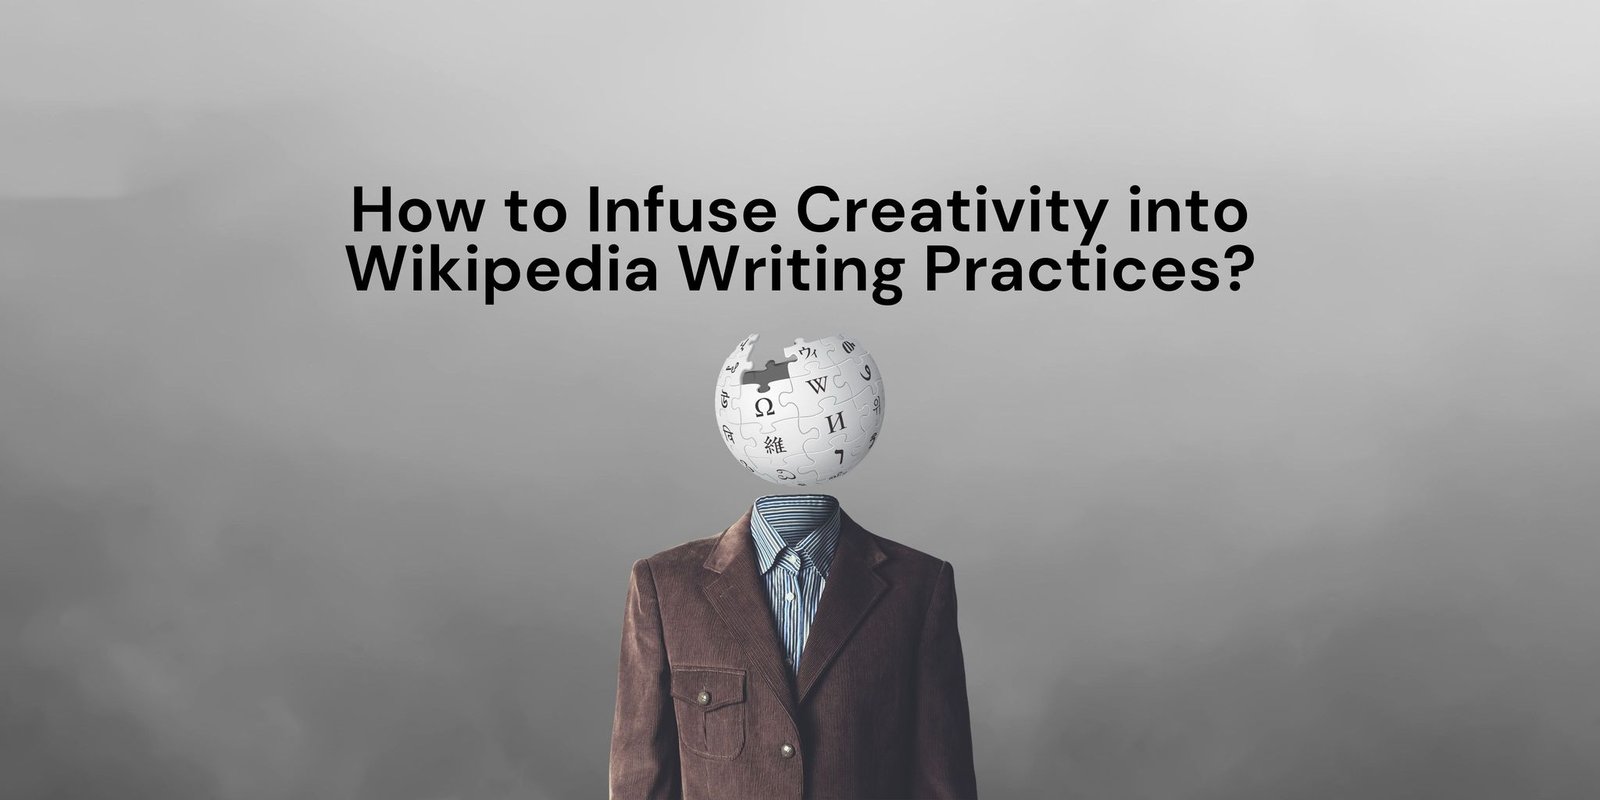 How to Infuse Creativity into Wikipedia Writing Practices?